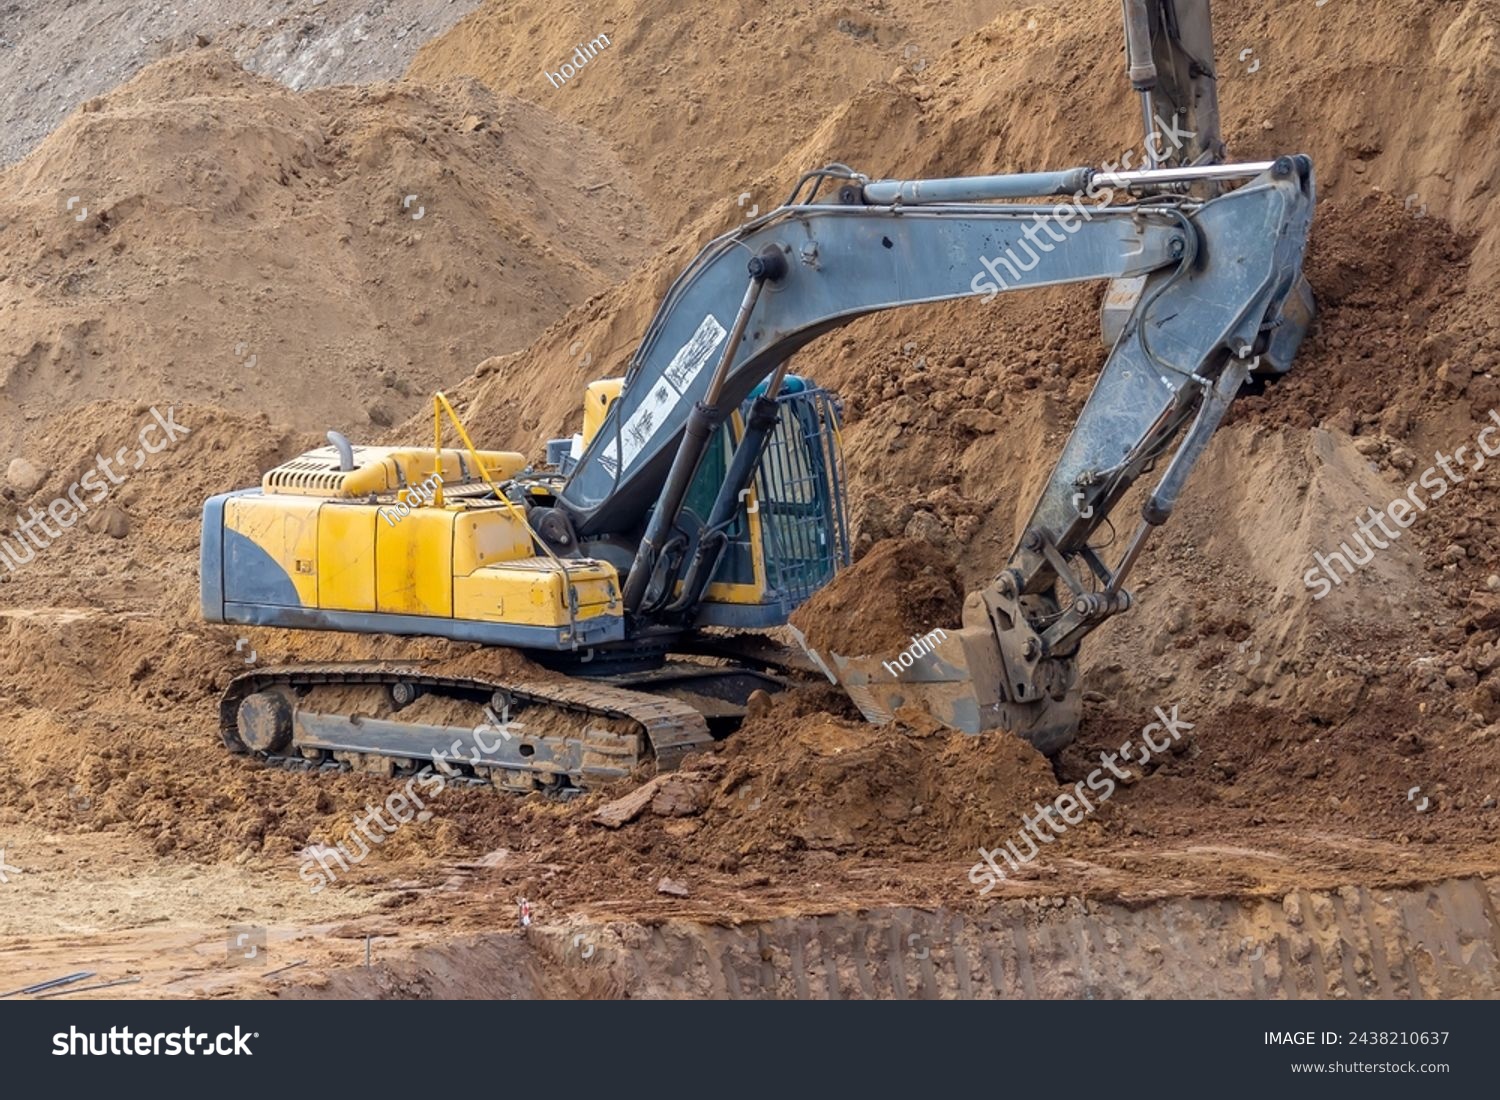 A crawler excavator is at work, the bucket is filled with soil. The machine ensures the development of land at the construction site. The excavator shows signs of dirt and wear, indicating heavy use #2438210637